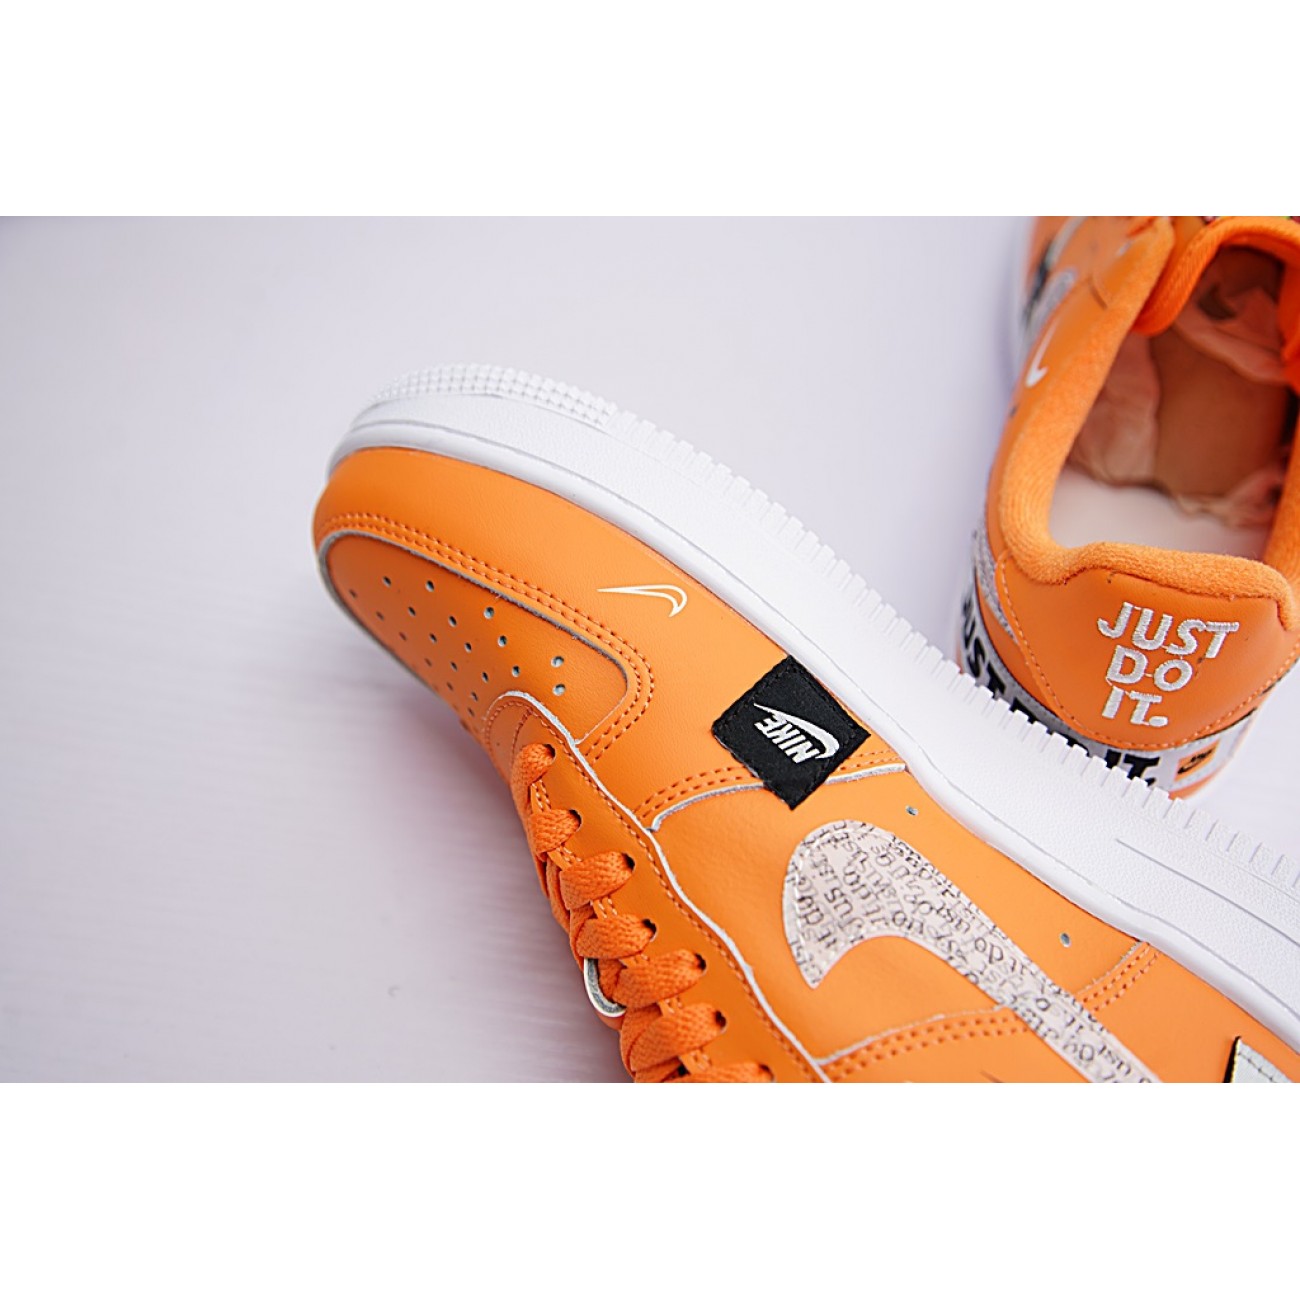 Nike Air Force 1 Low "Just Do It" 905345-800